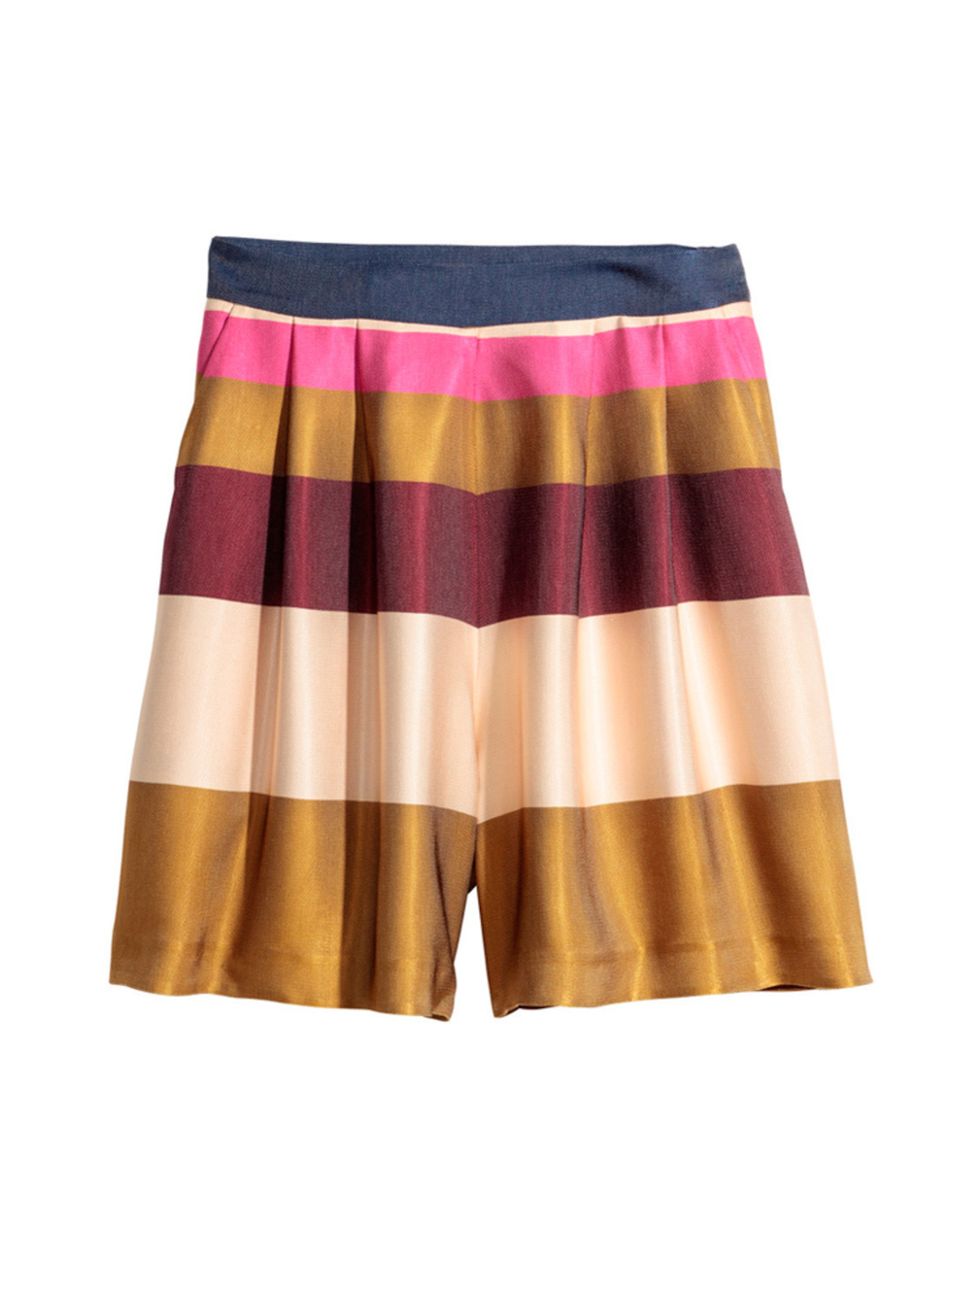 <p> Executive Fashion & Beauty Director Kirsty Dale is prepped for the heatwave on Saturday with these colour pop shorts. </p>

<p> </p>

<p><a href="http://www.hm.com/gb/product/20736?article=20736-A" target="_blank">H&M</a> Shorts, £39.99</p>